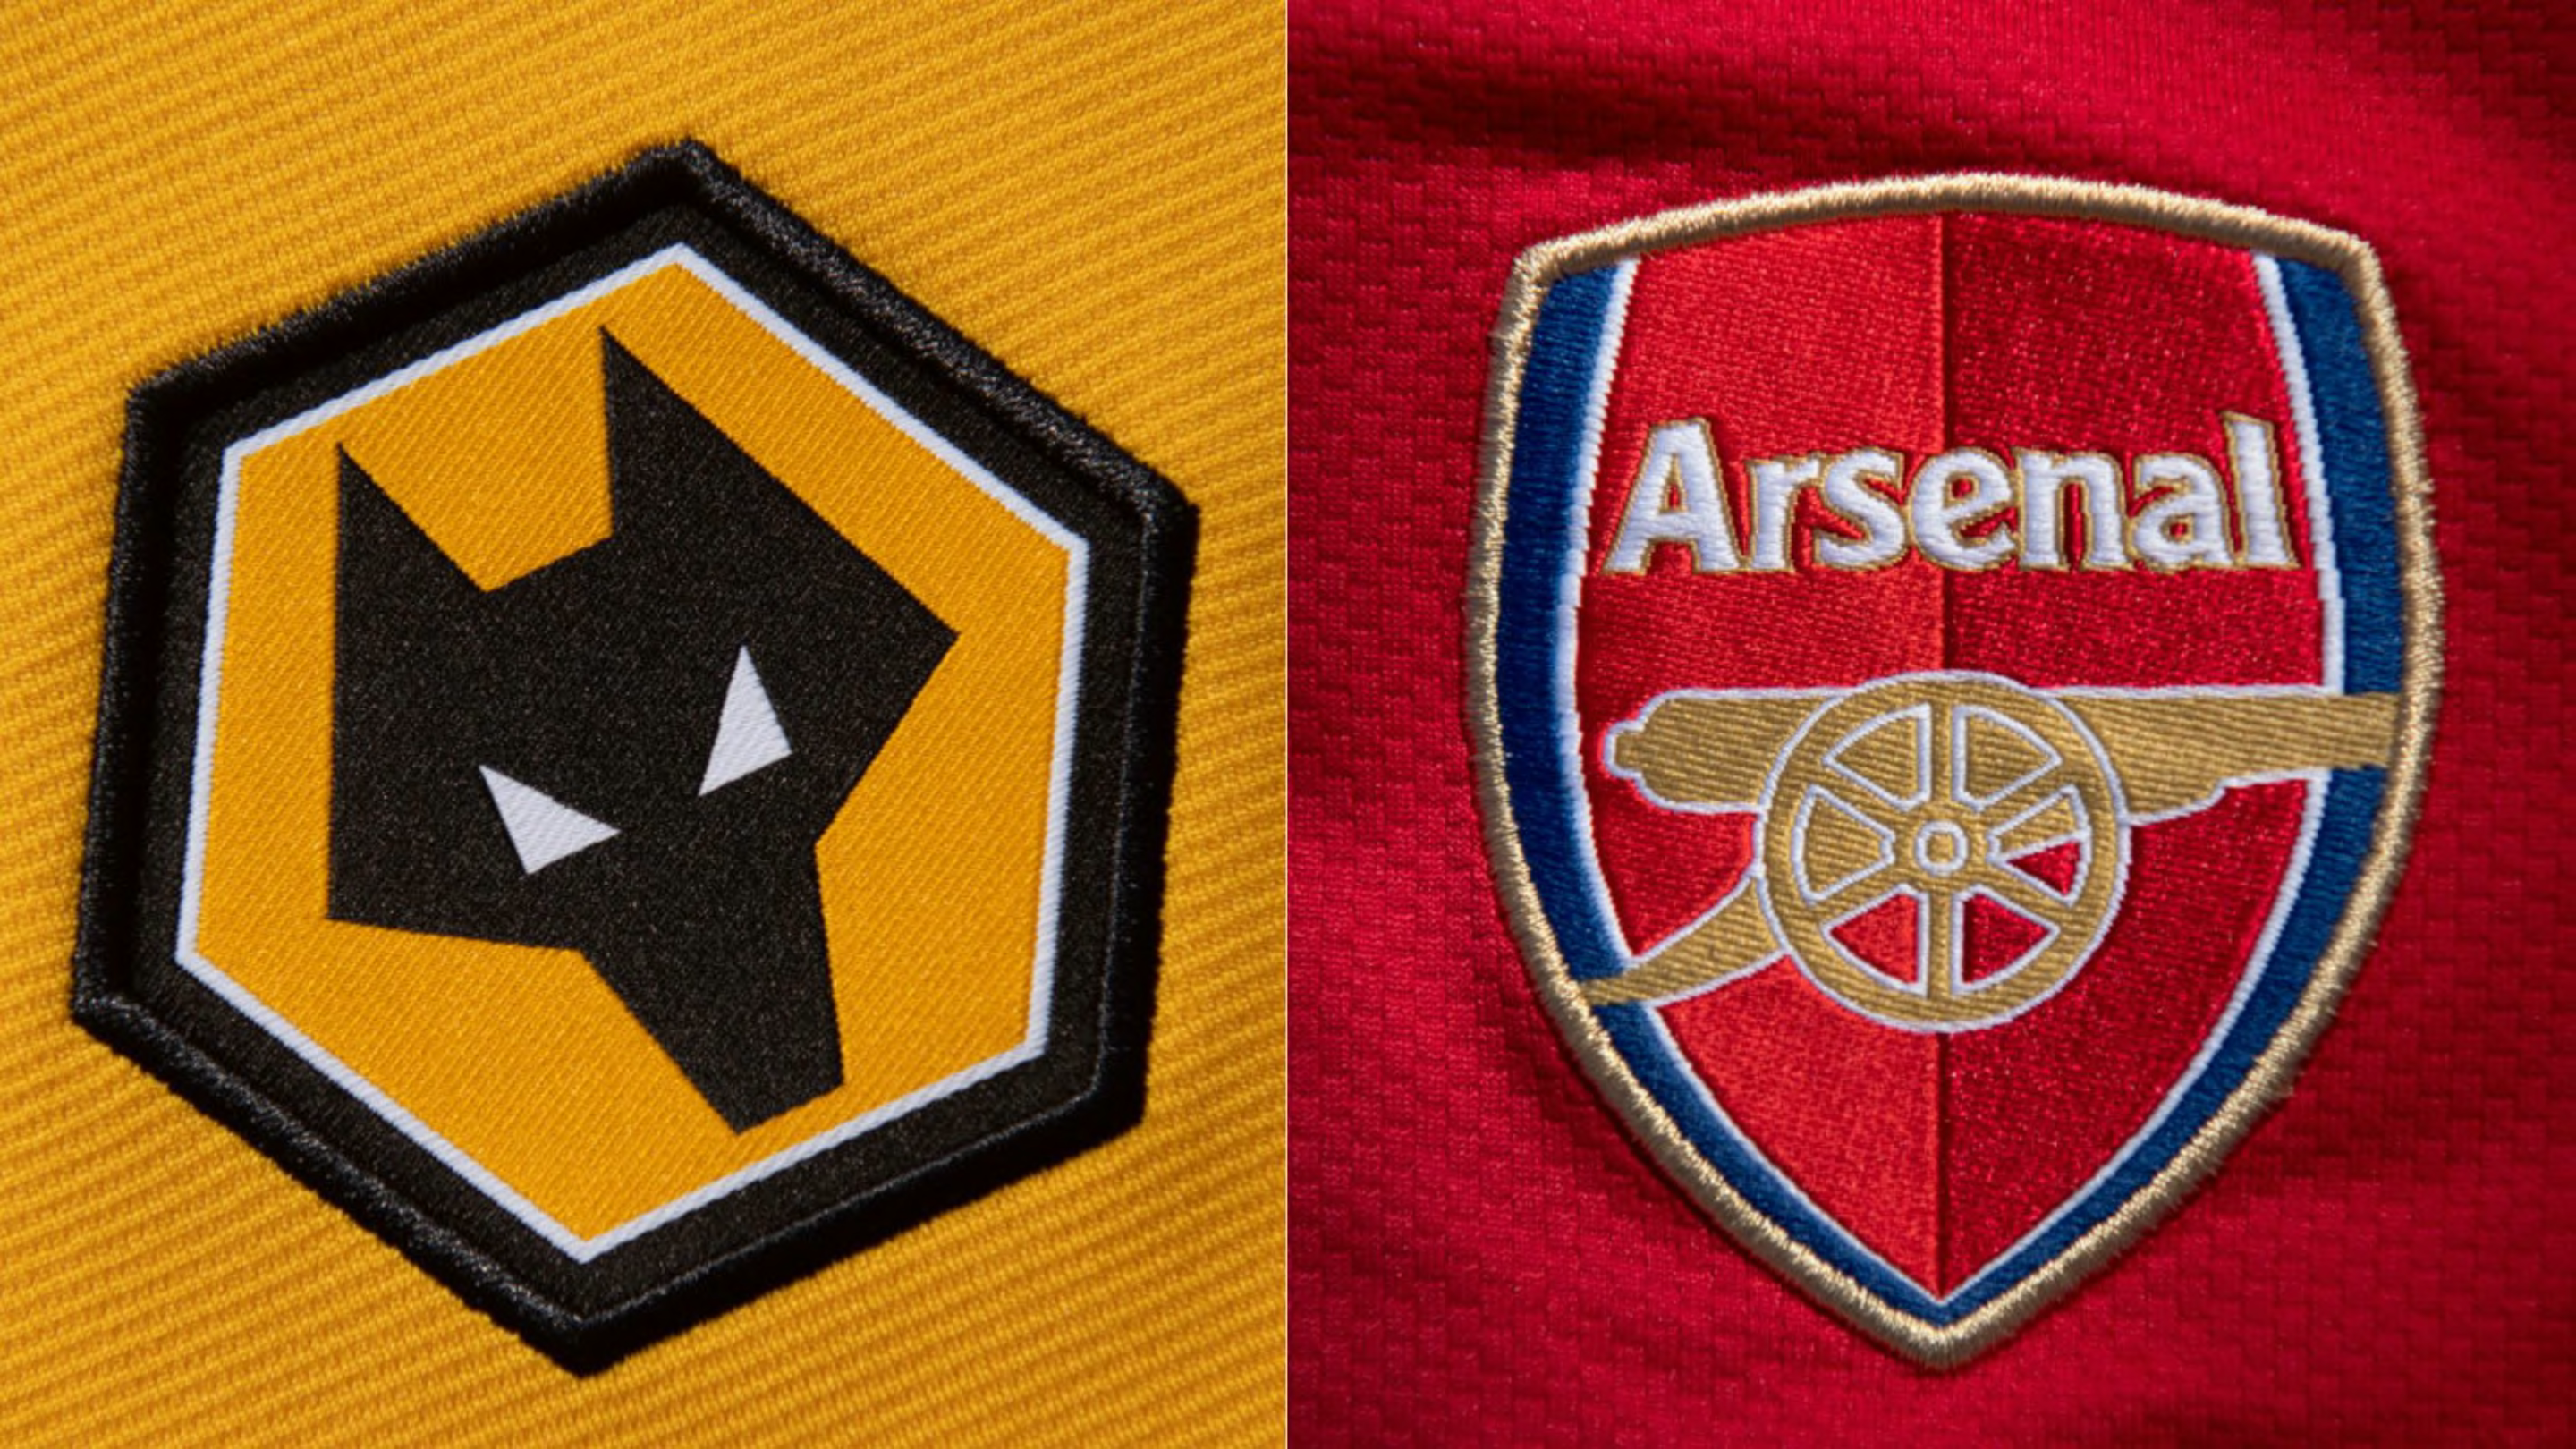 Wolves vs Arsenal: The results of their last 10 meetings